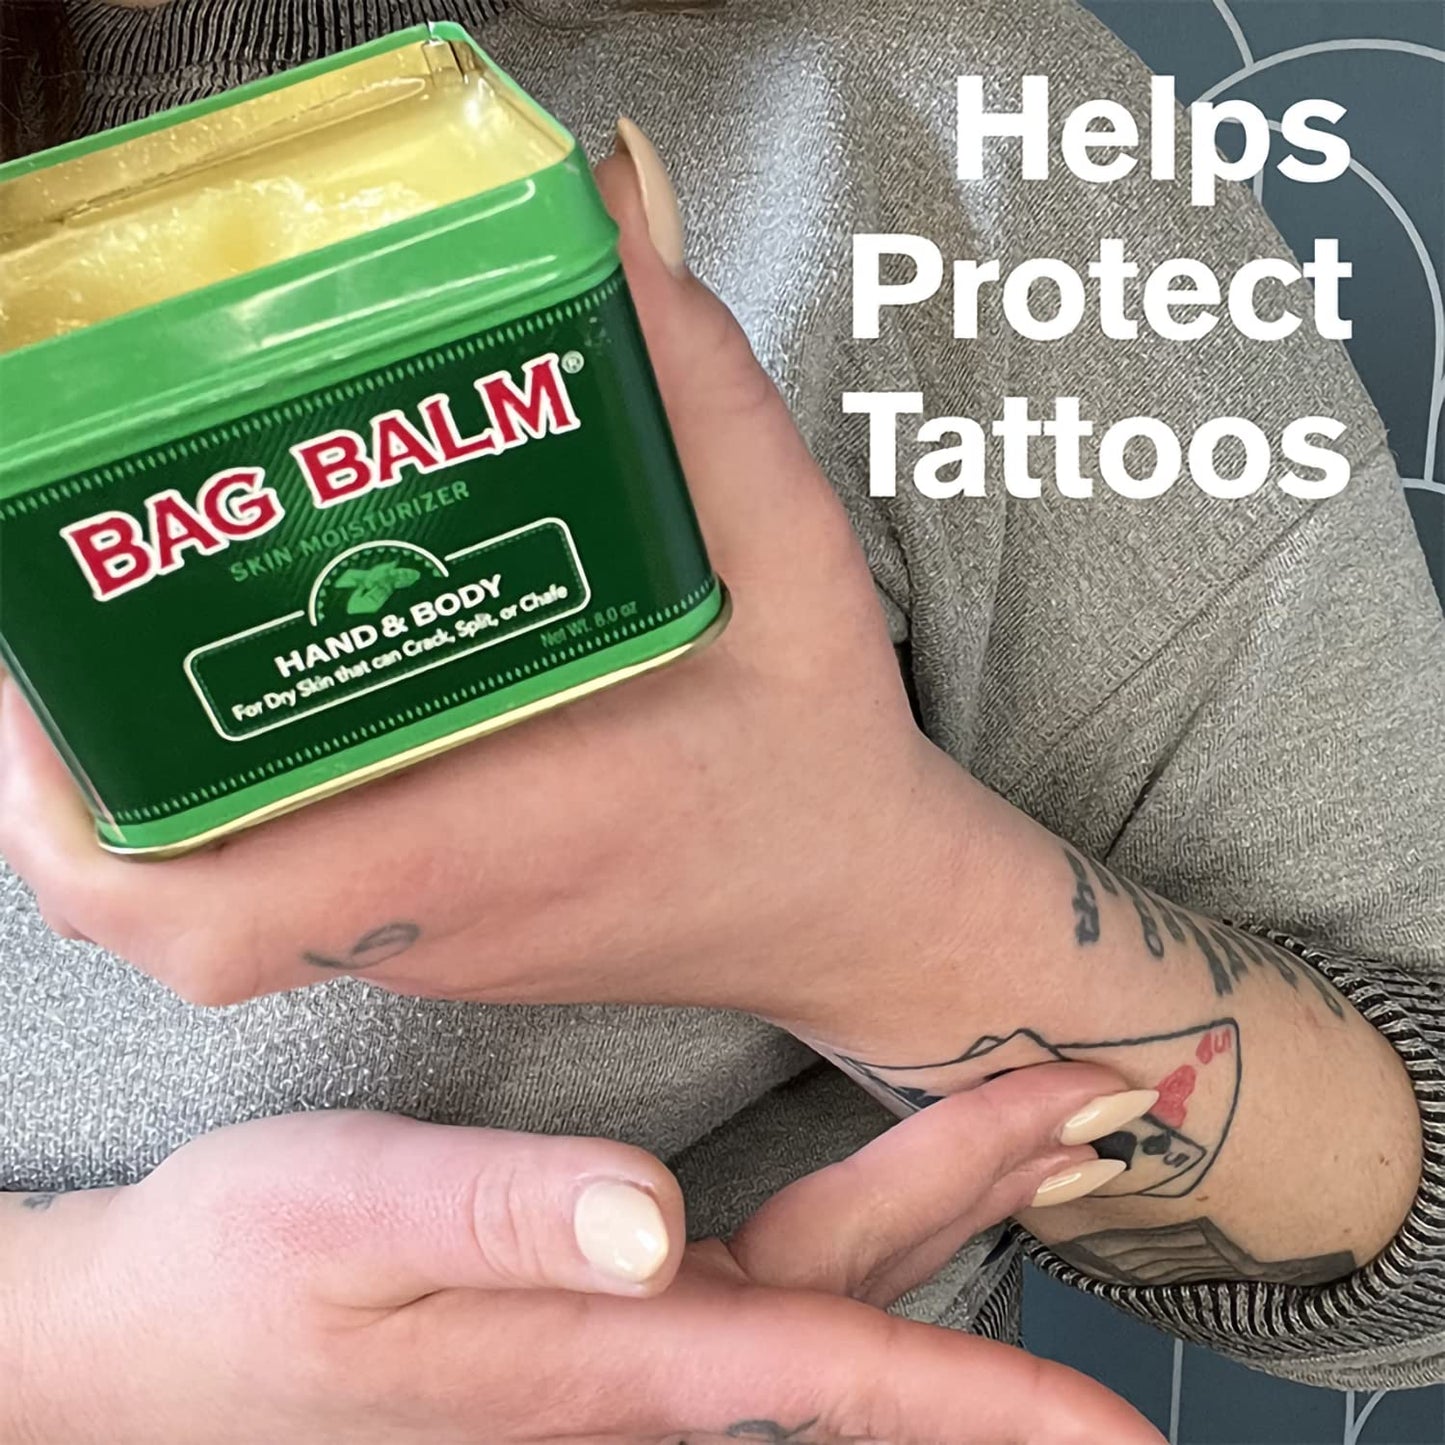 Bag Balm Vermont's Original for Dry Chapped Skin Conditions 8 Ounce Tin